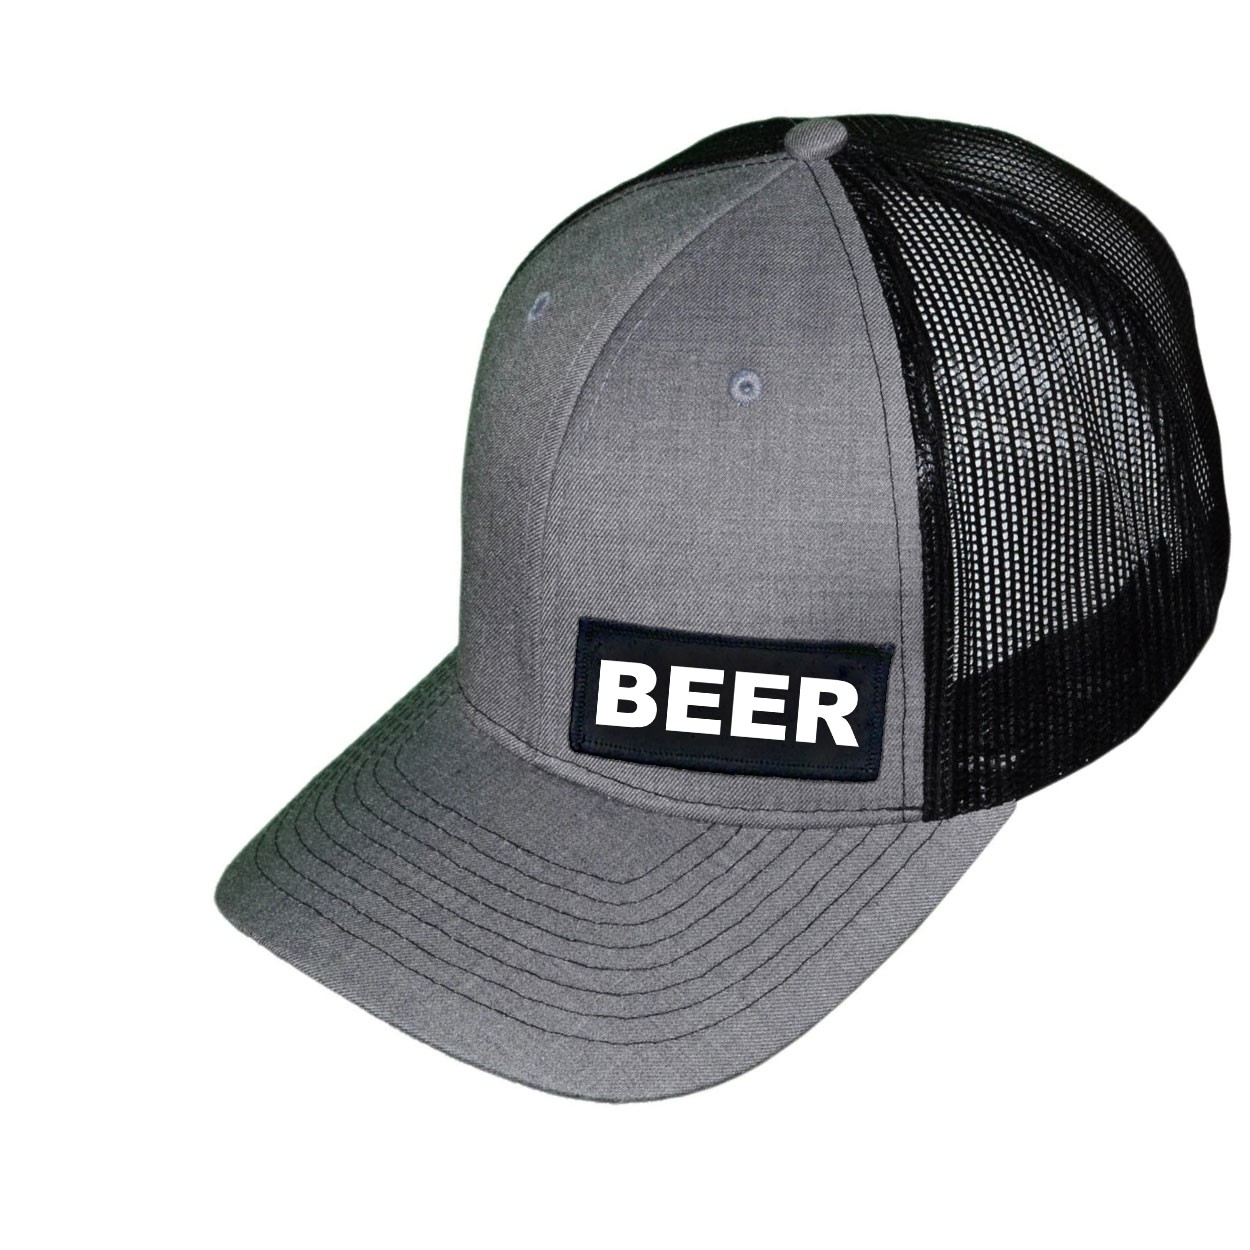 Beer Brand Logo Night Out Woven Patch Snapback Trucker Hat Heather Gray/Black (White Logo)